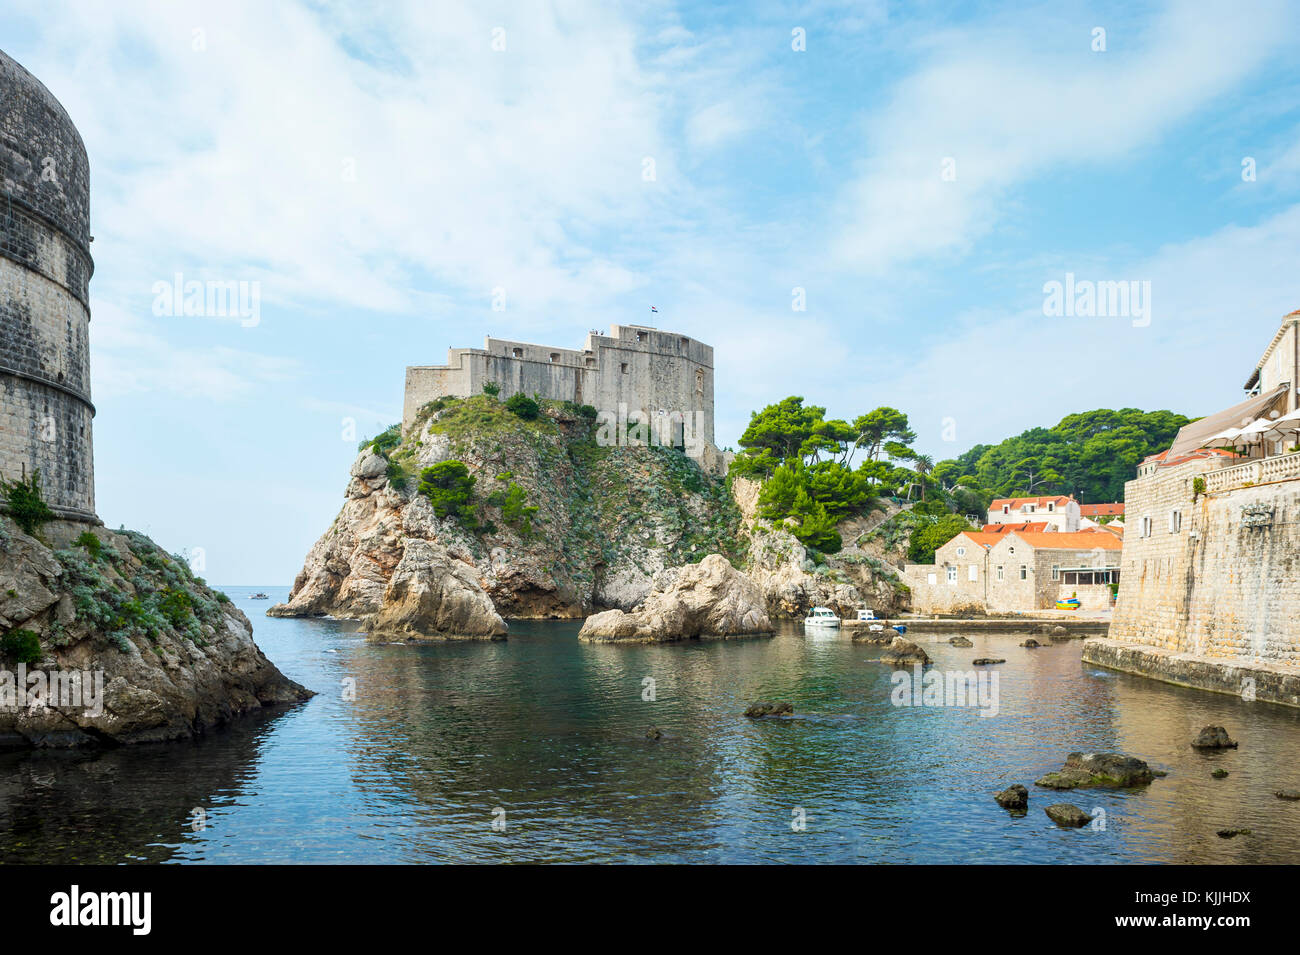 Scenic view of the turquoise Mediterranean waters surrounding the walled medieval city of Dubrovnik, Croatia Stock Photo